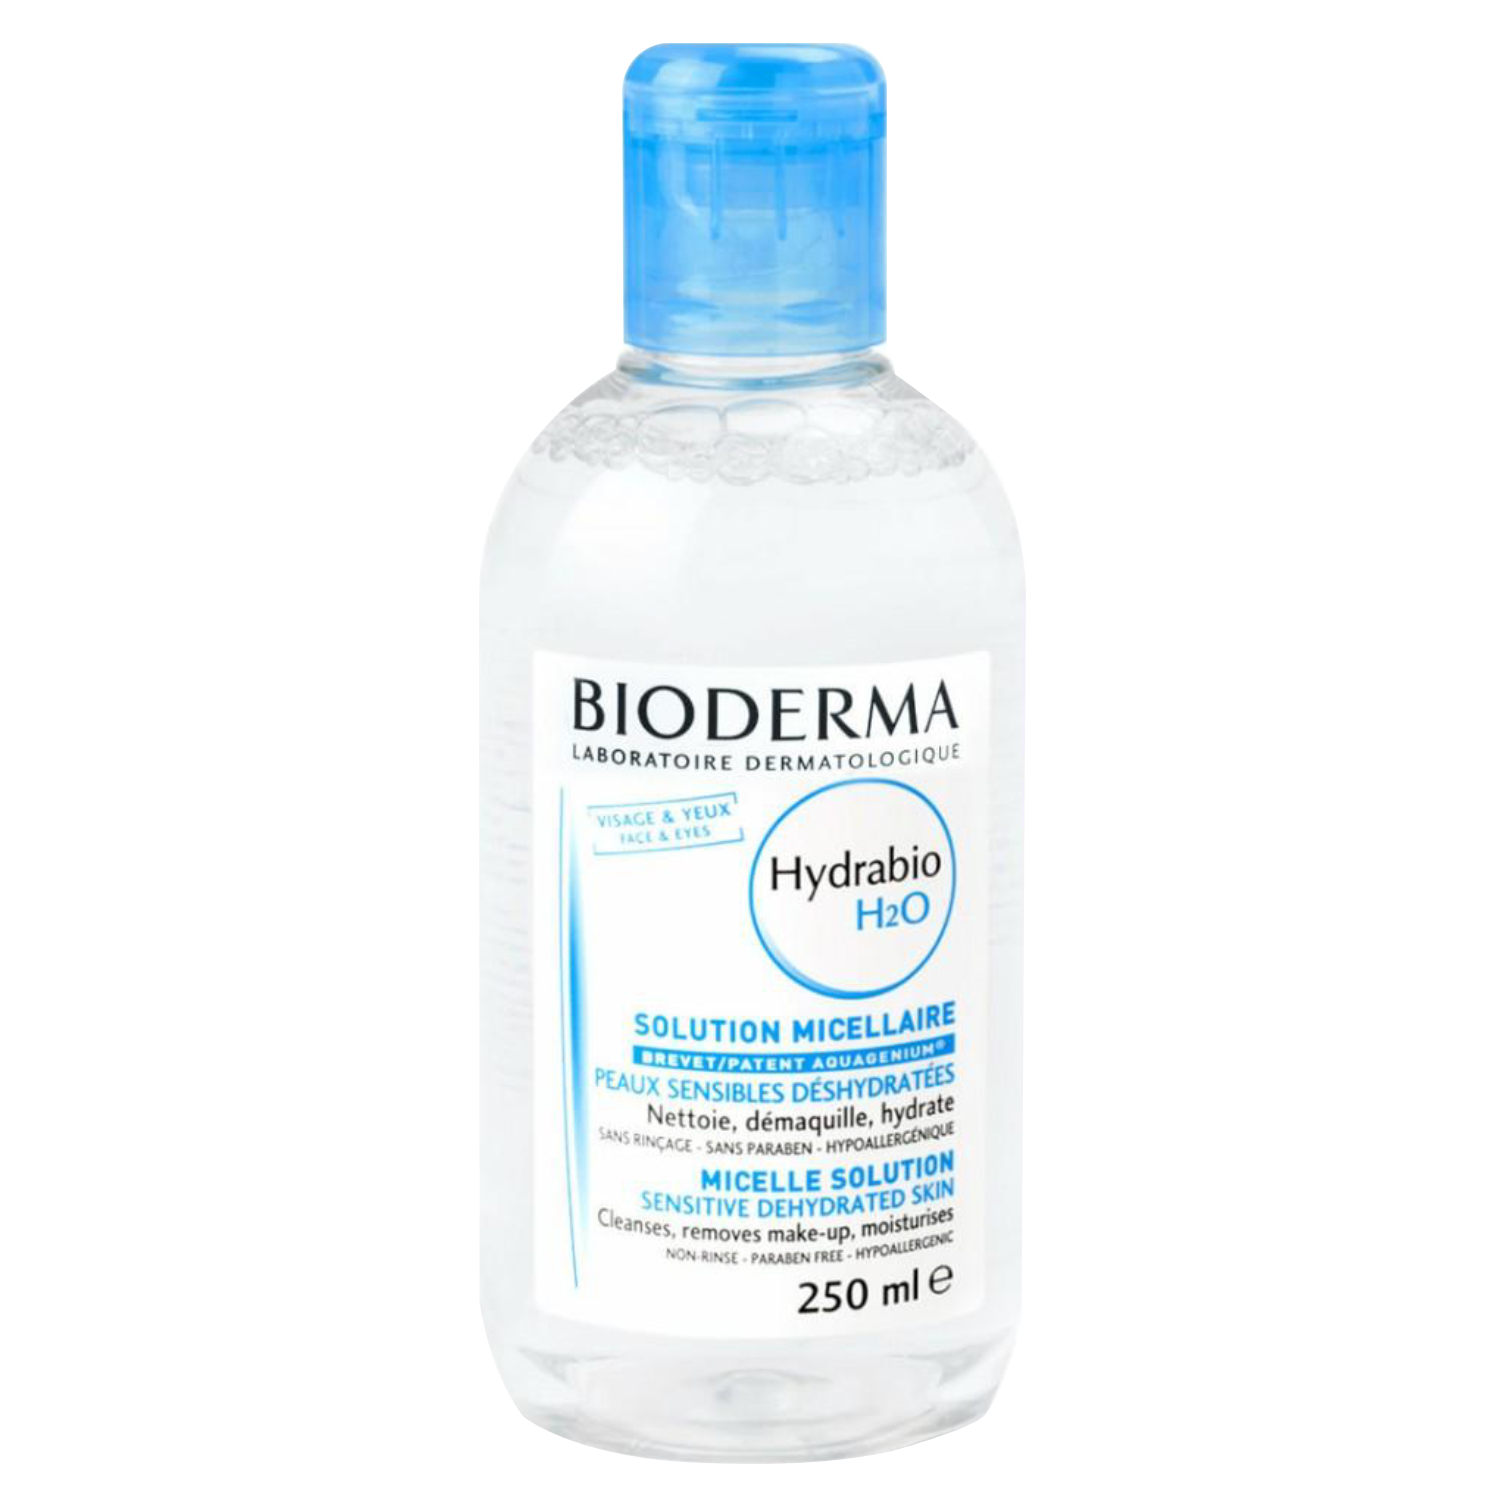 Back Image for Bioderma Hydrabio H2O Micelle Solution 250ml